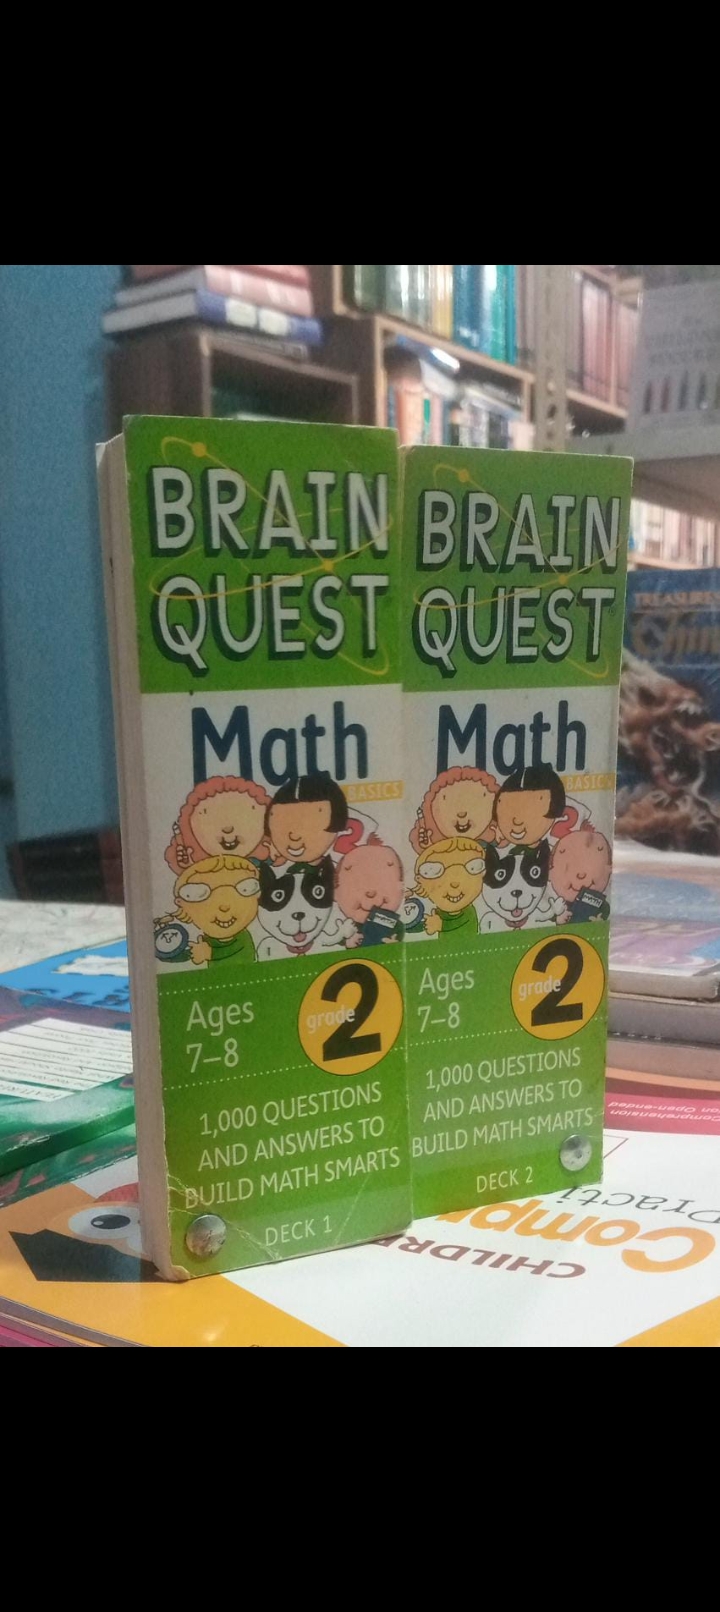 brain quest math basic ages 7-8 for grade 2 1000 questions and answers to build math smarts..